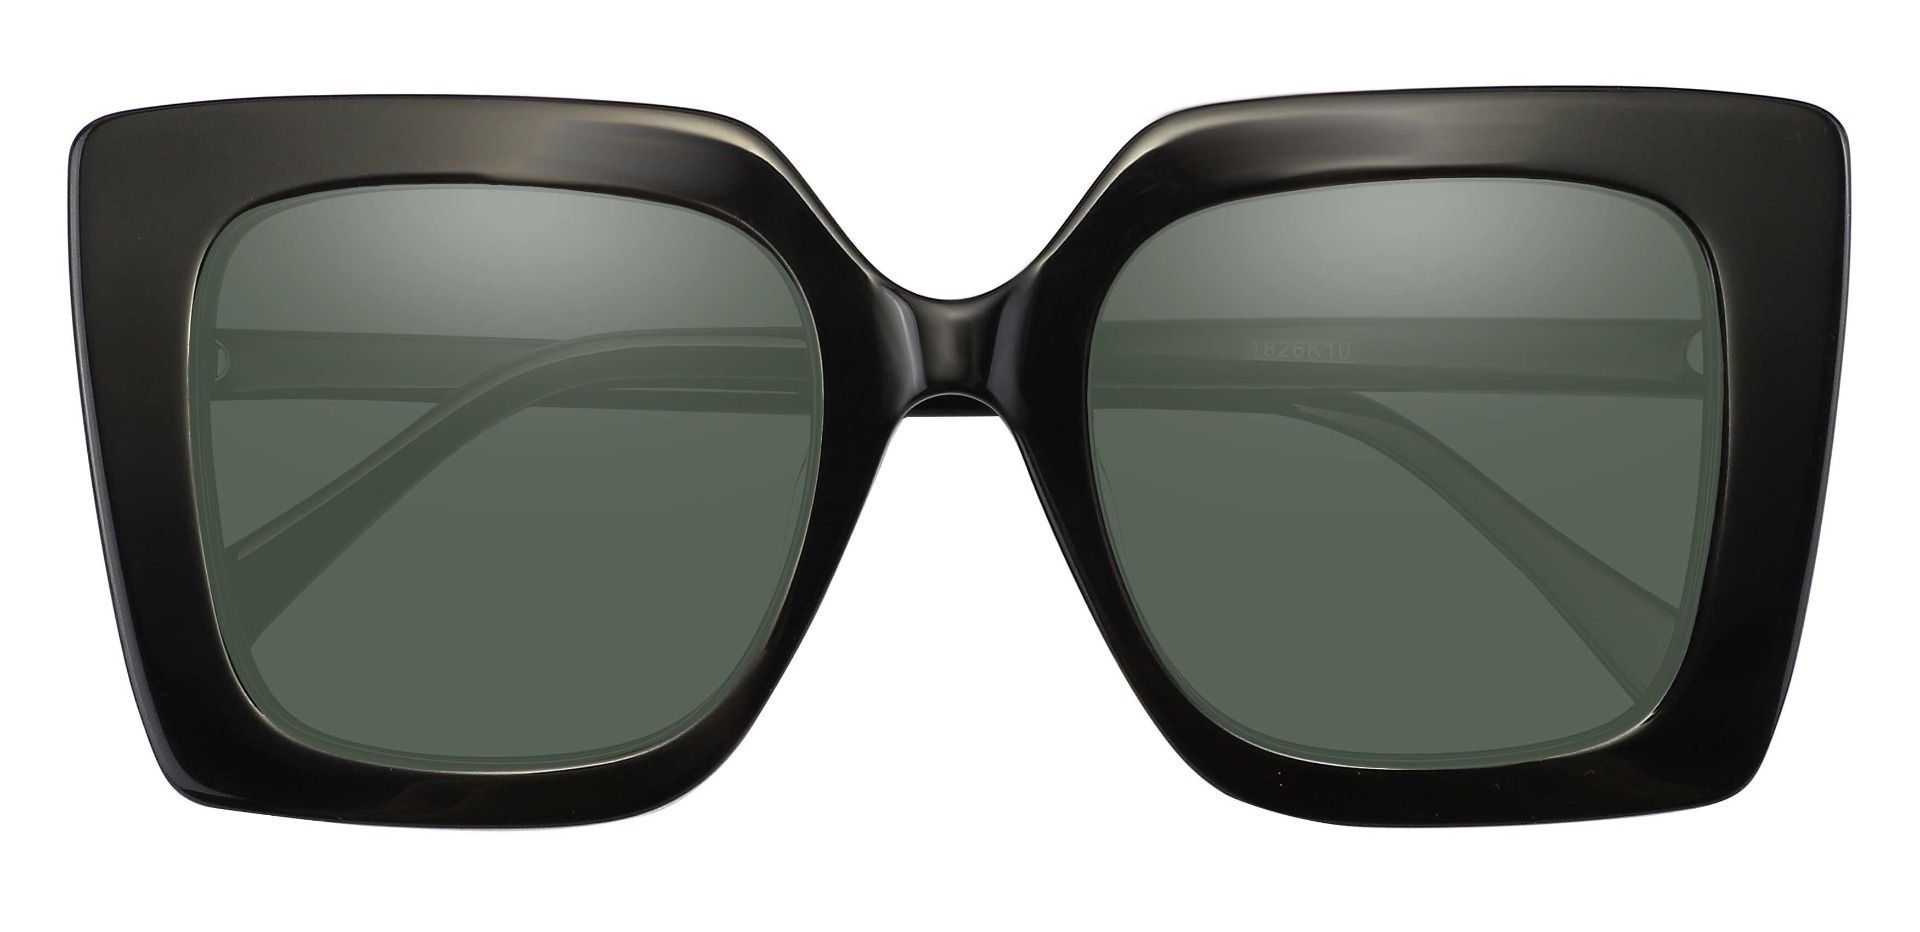 Rowland Square Reading Sunglasses - Black Frame With Green Lenses